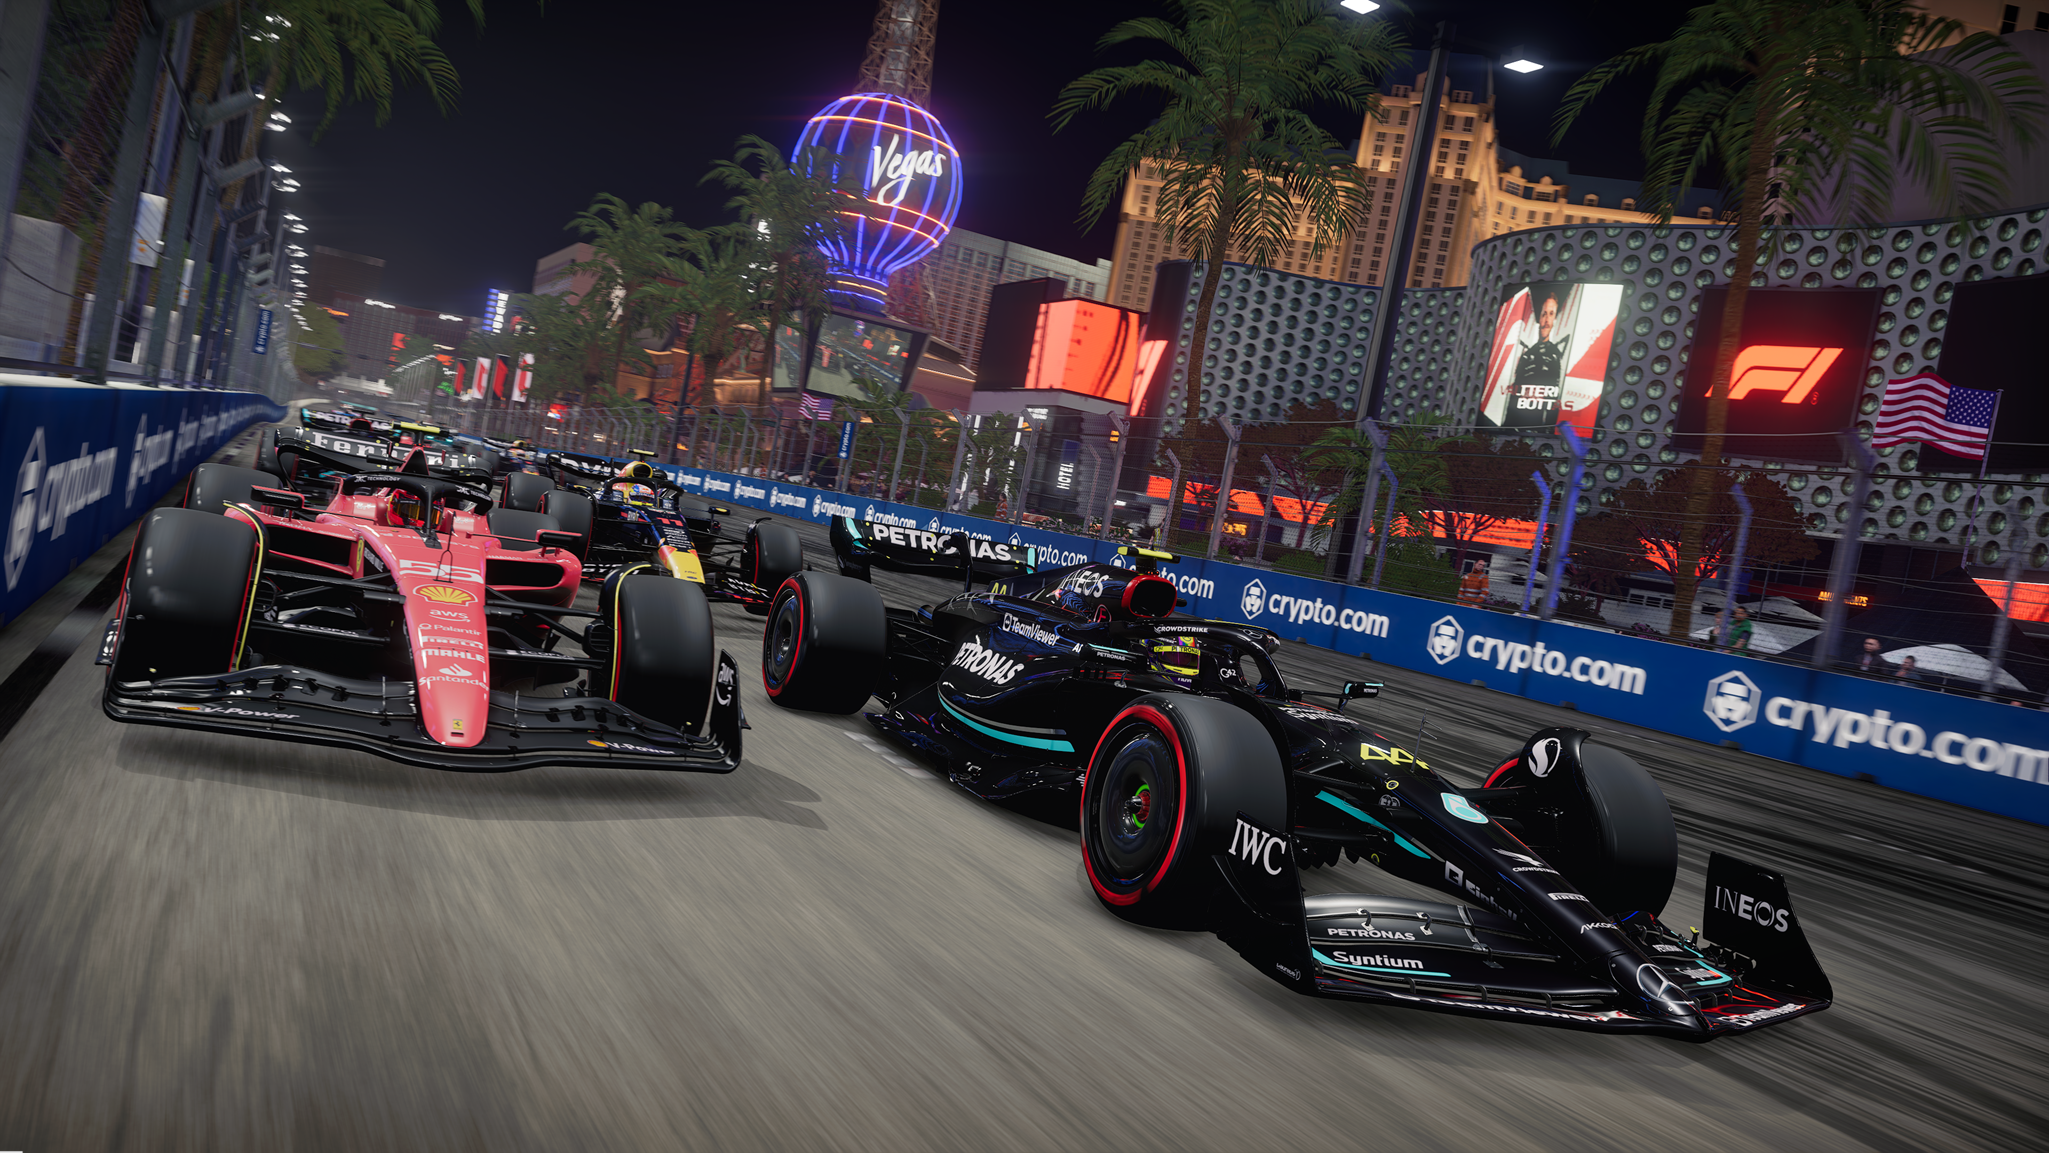 F1 23 New Official Gameplay Demo 11 Minutes (4K) 